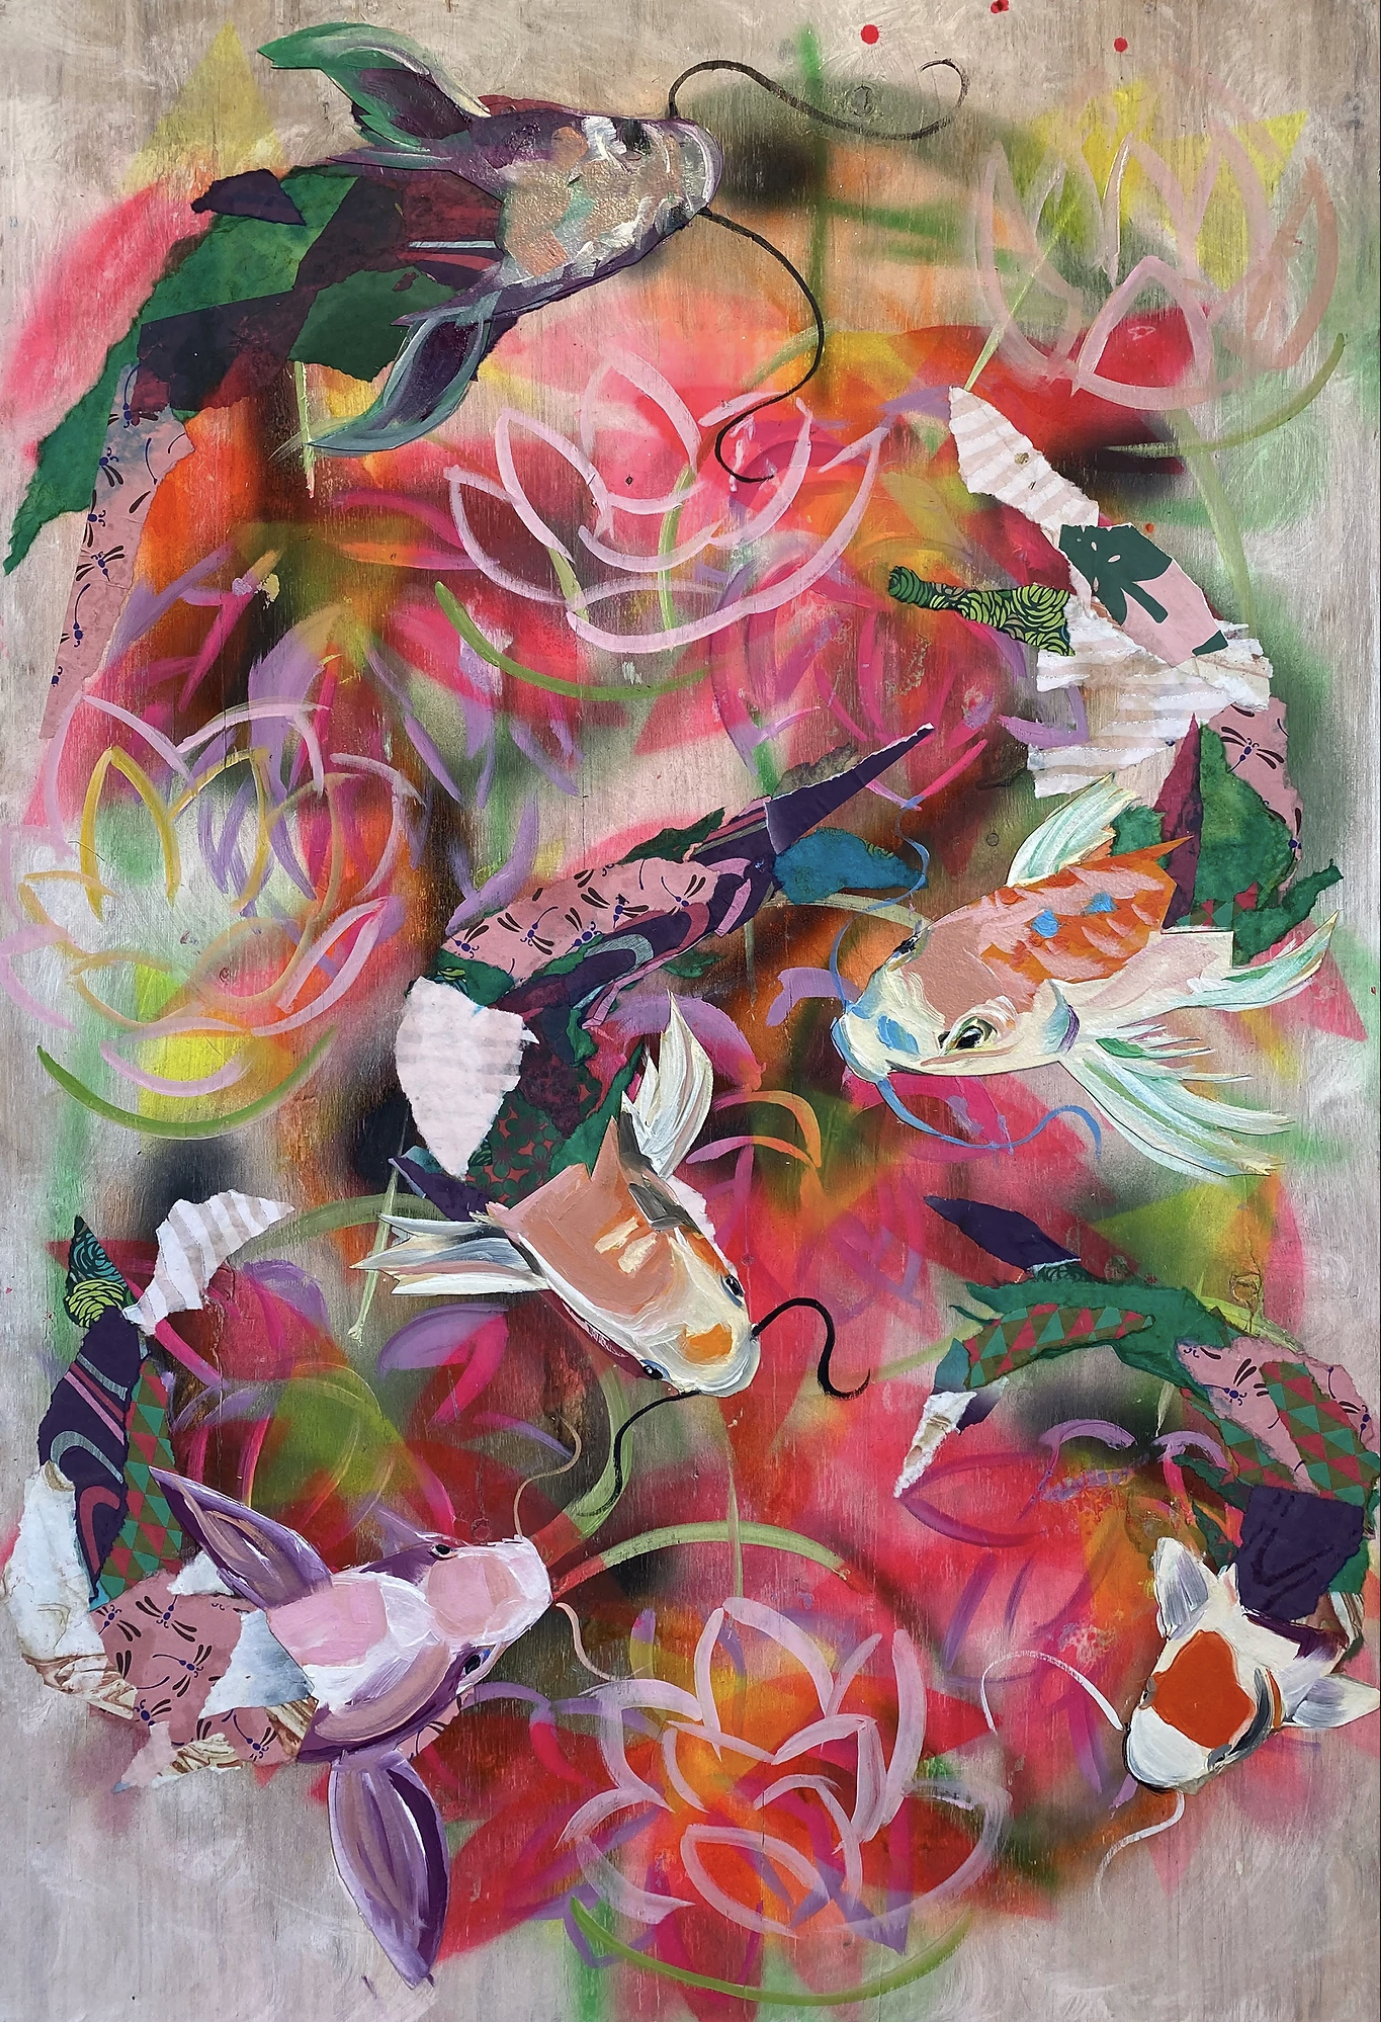 Lotus 2021 (30"x44") Mixed media collage and oil on panel board.